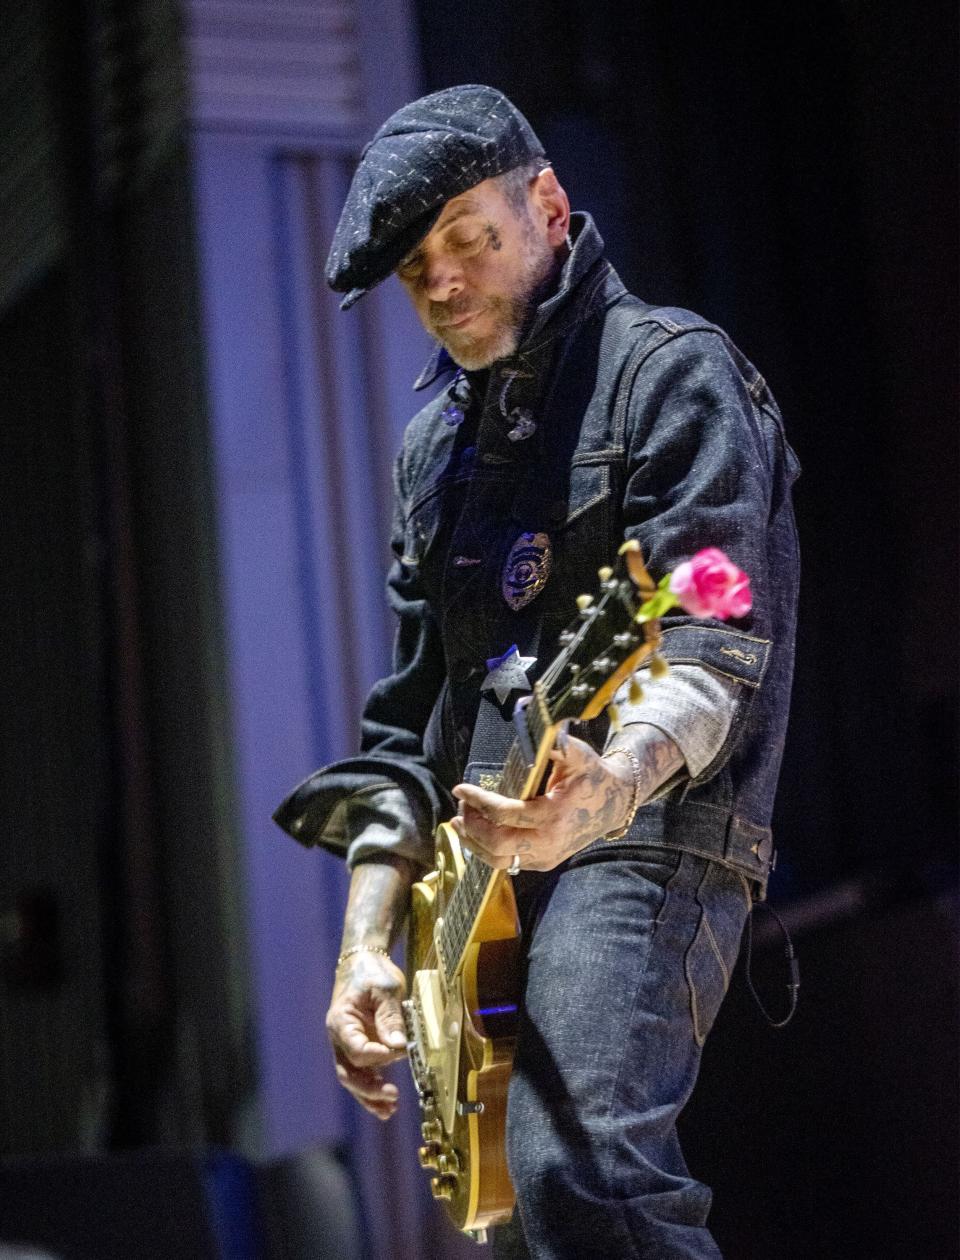 Mike Ness fronting Social Distortion at Stage AE.